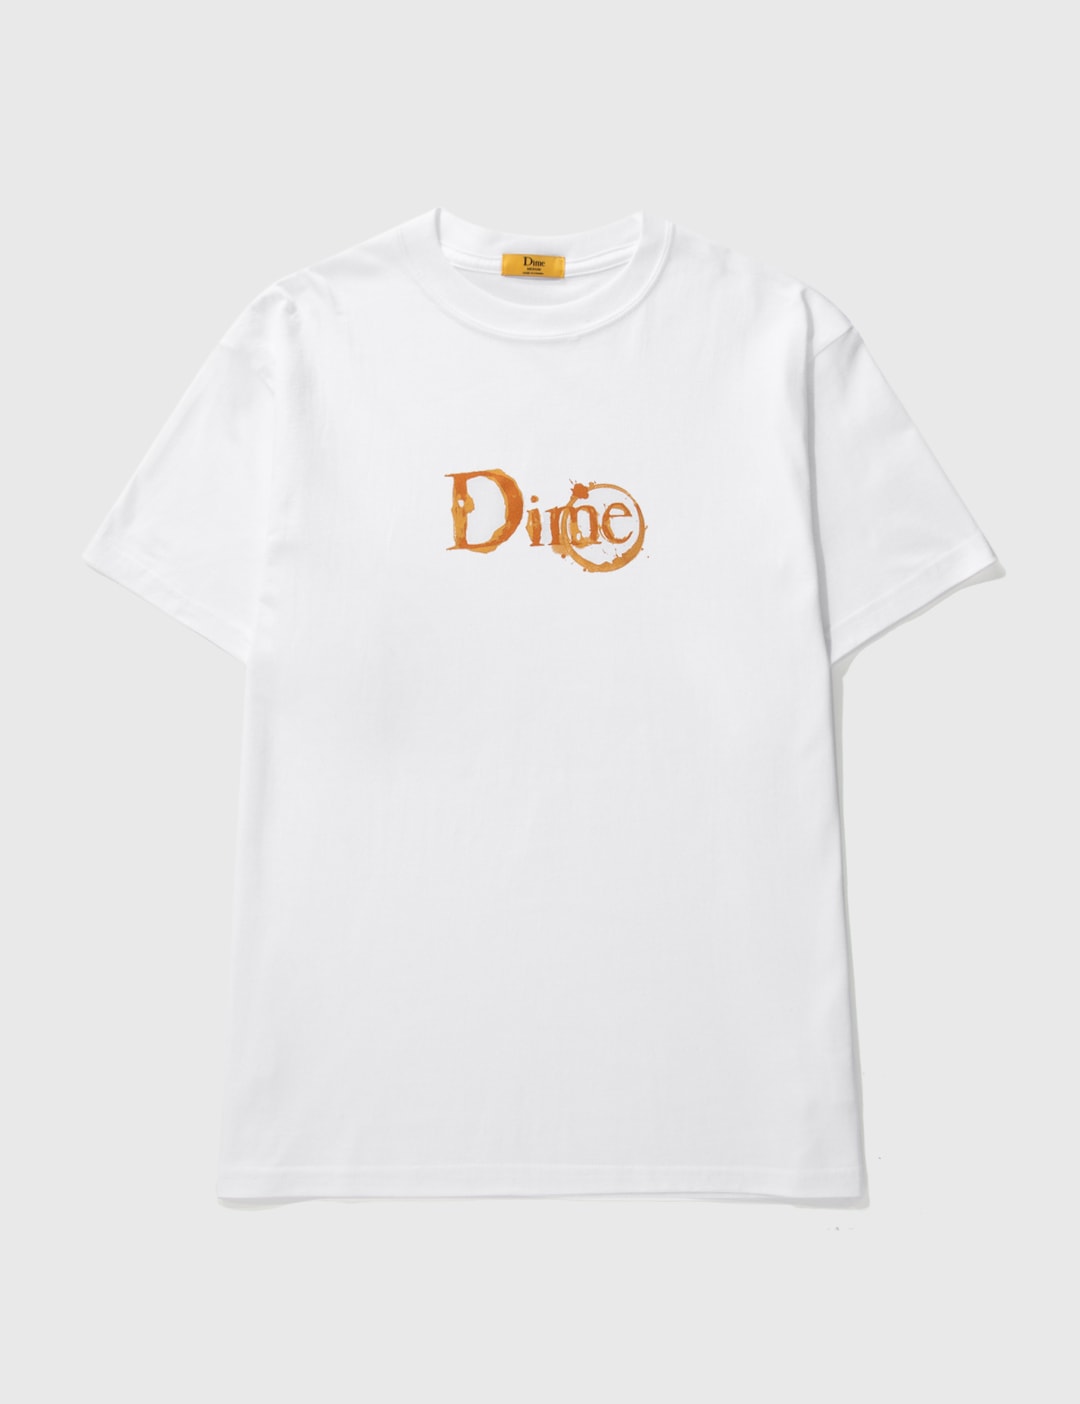 Dime - Classic Mocha T-shirt | HBX - Globally Curated Fashion and ...